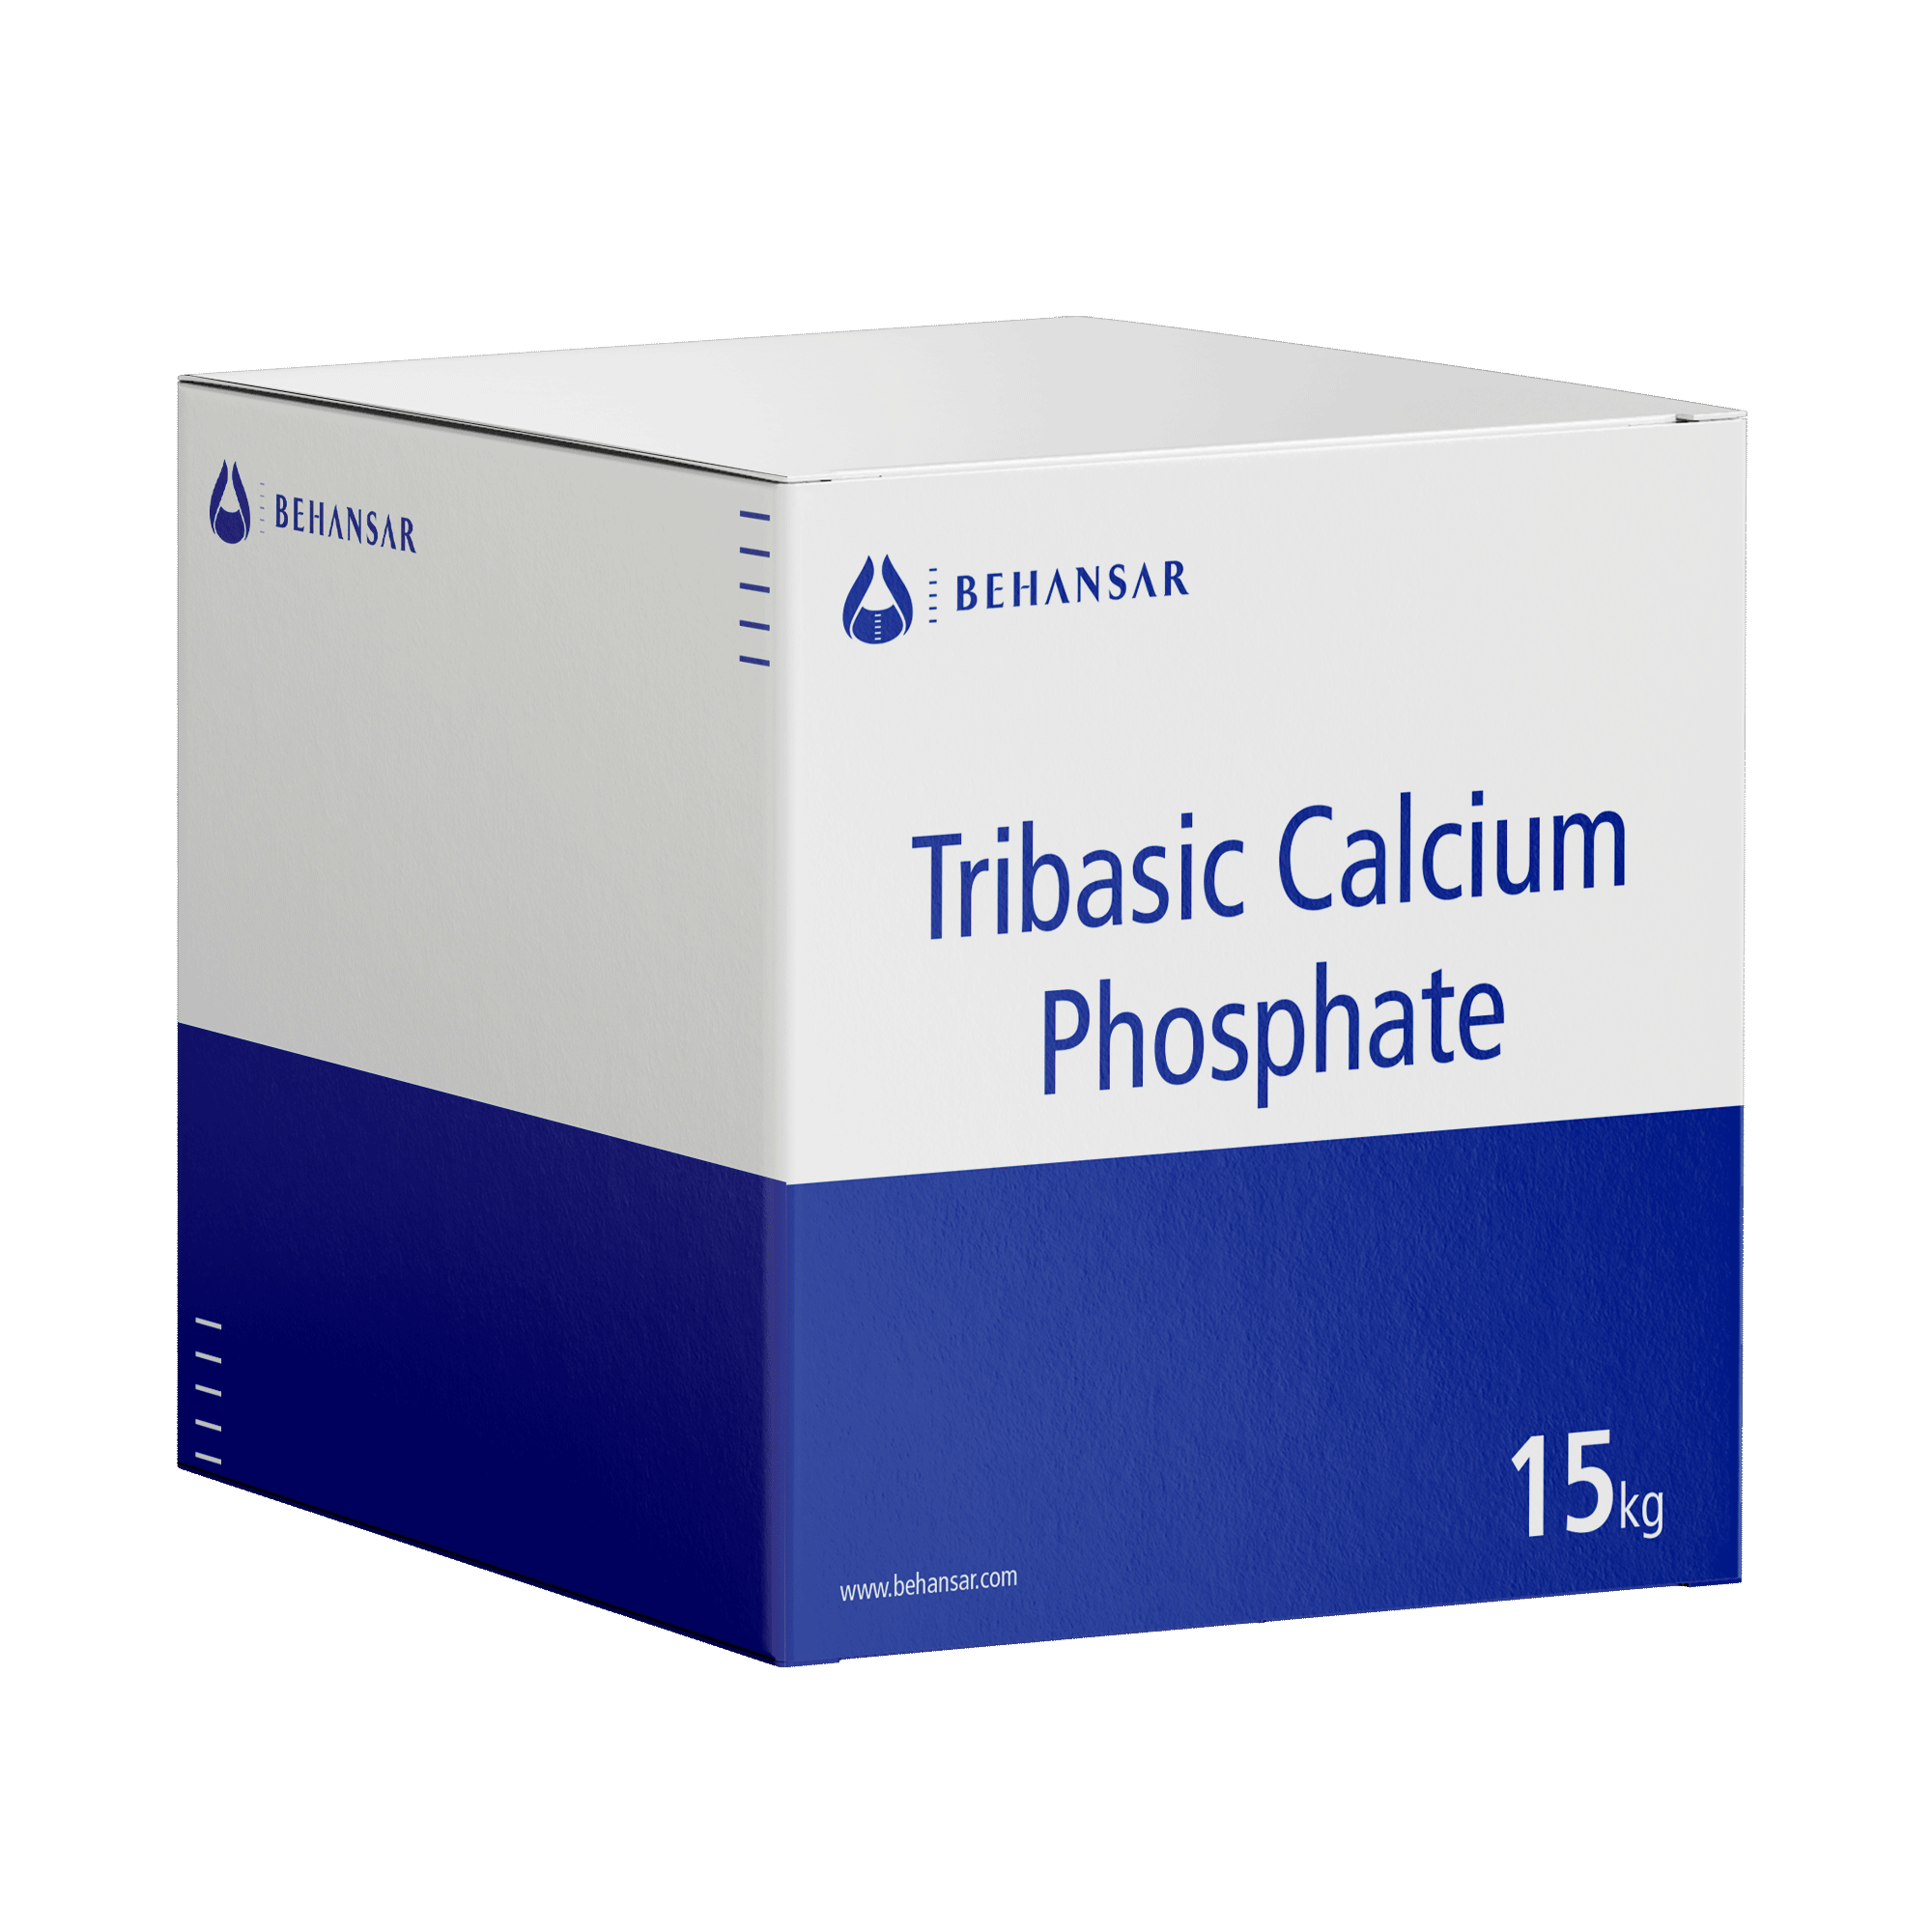 Tribasic Calcium Phosphate is one of the products of Behansar Co